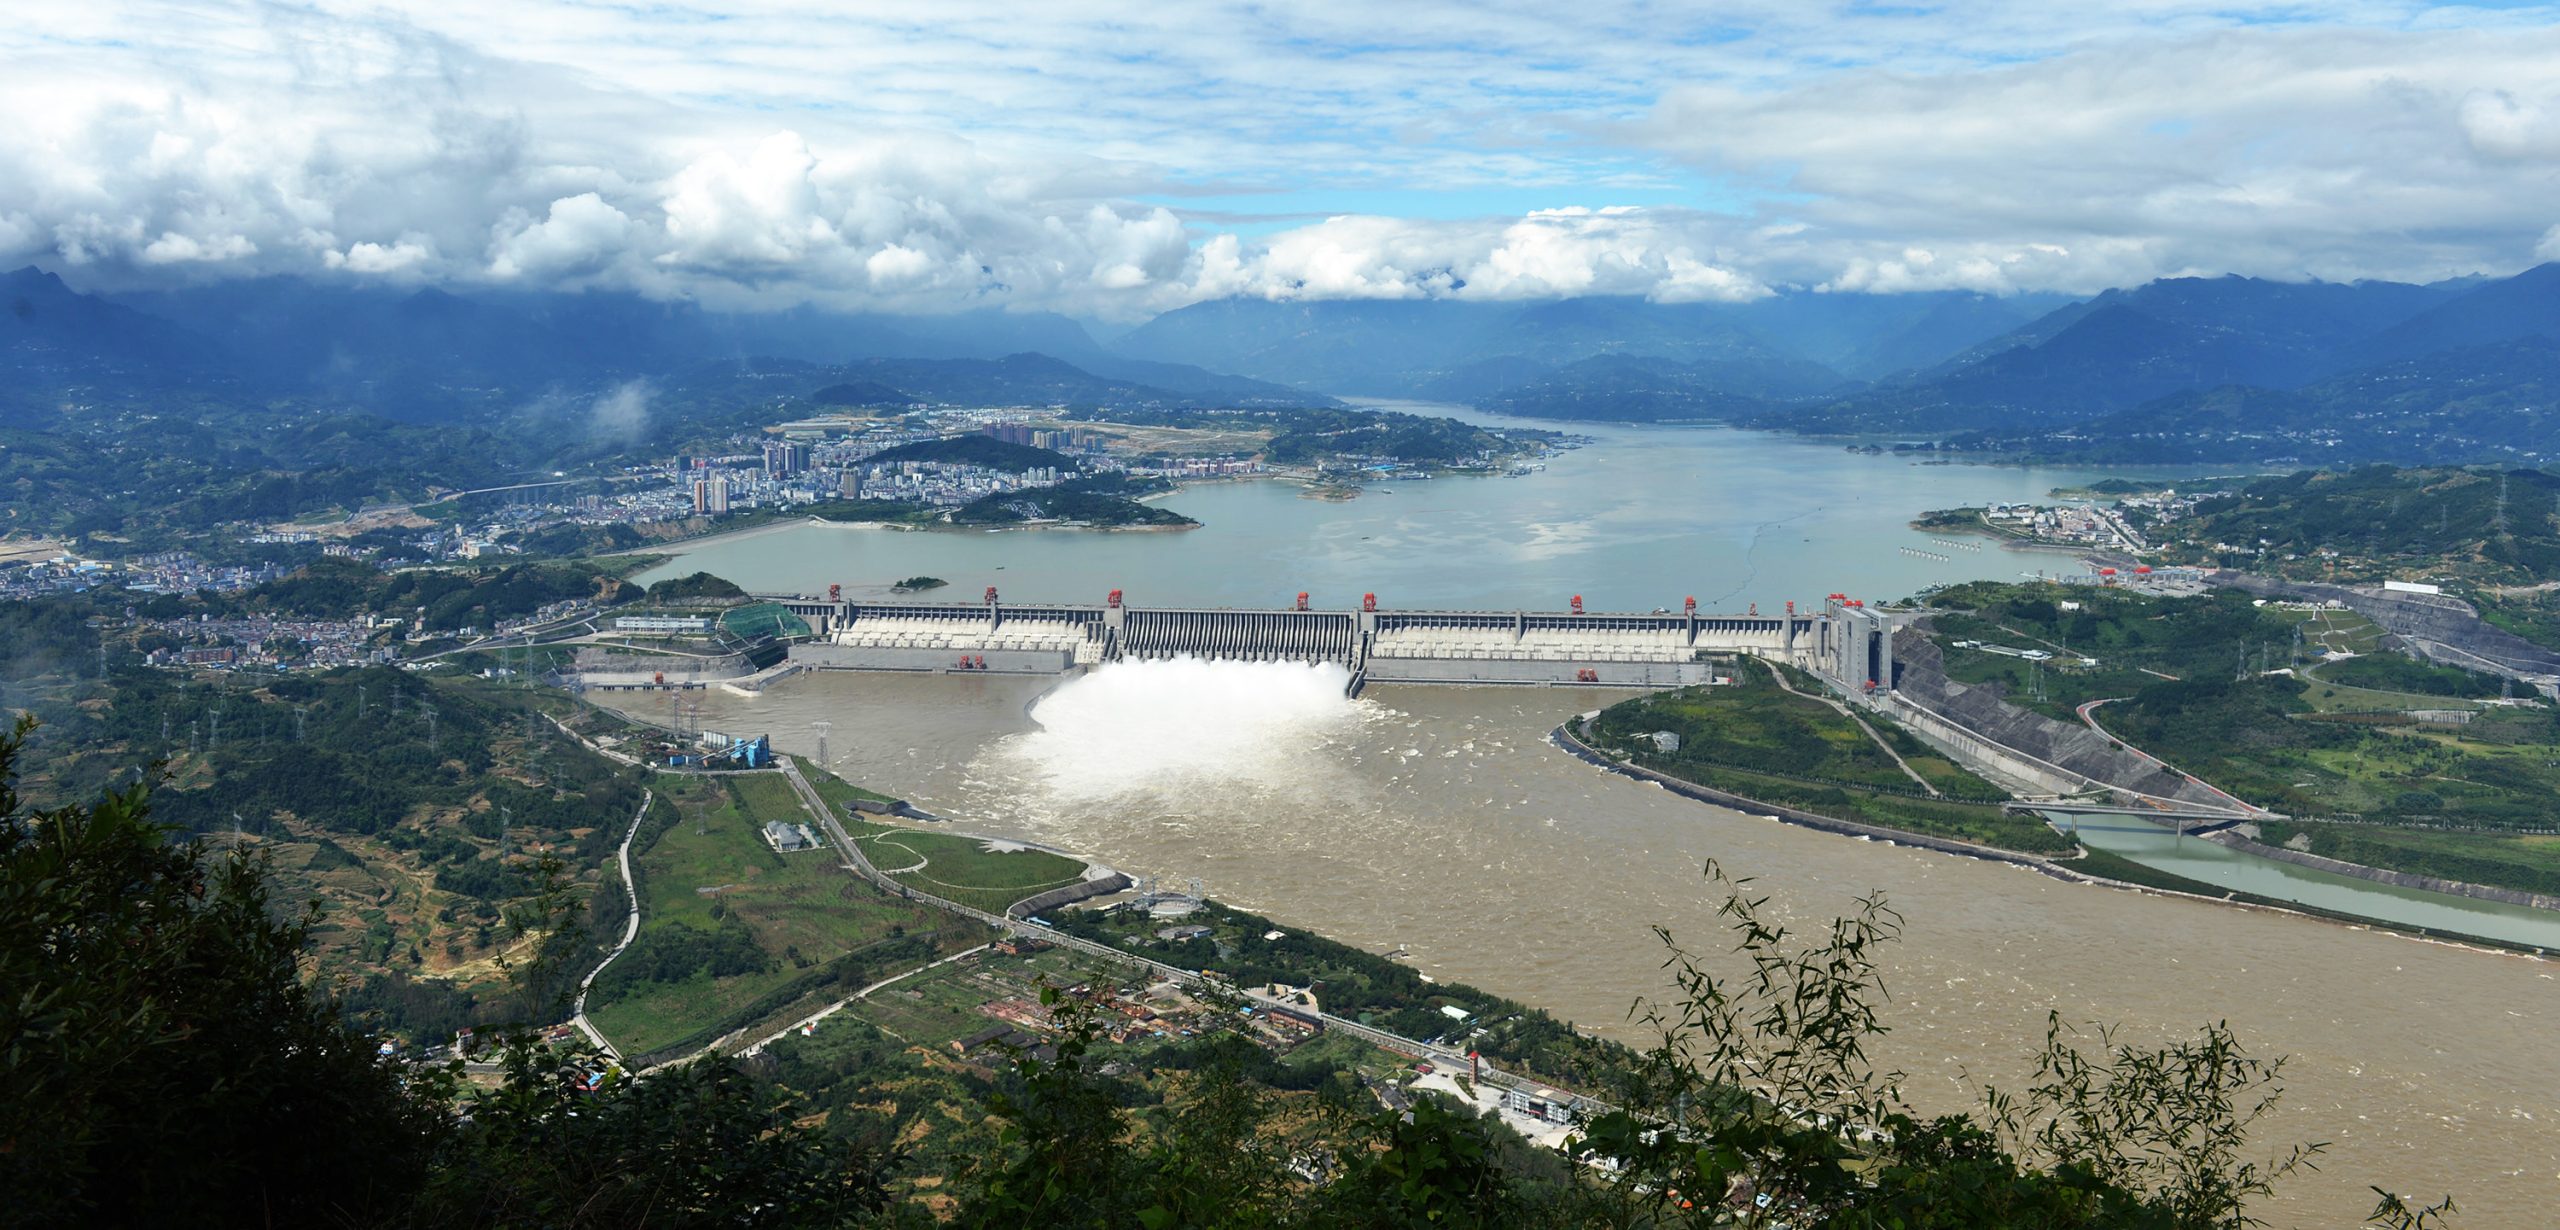 The Three Gorges Dam, which holds back China’s Yangtze River, is the largest hydropower dam in the world. Photo by Imaginechina/Corbis